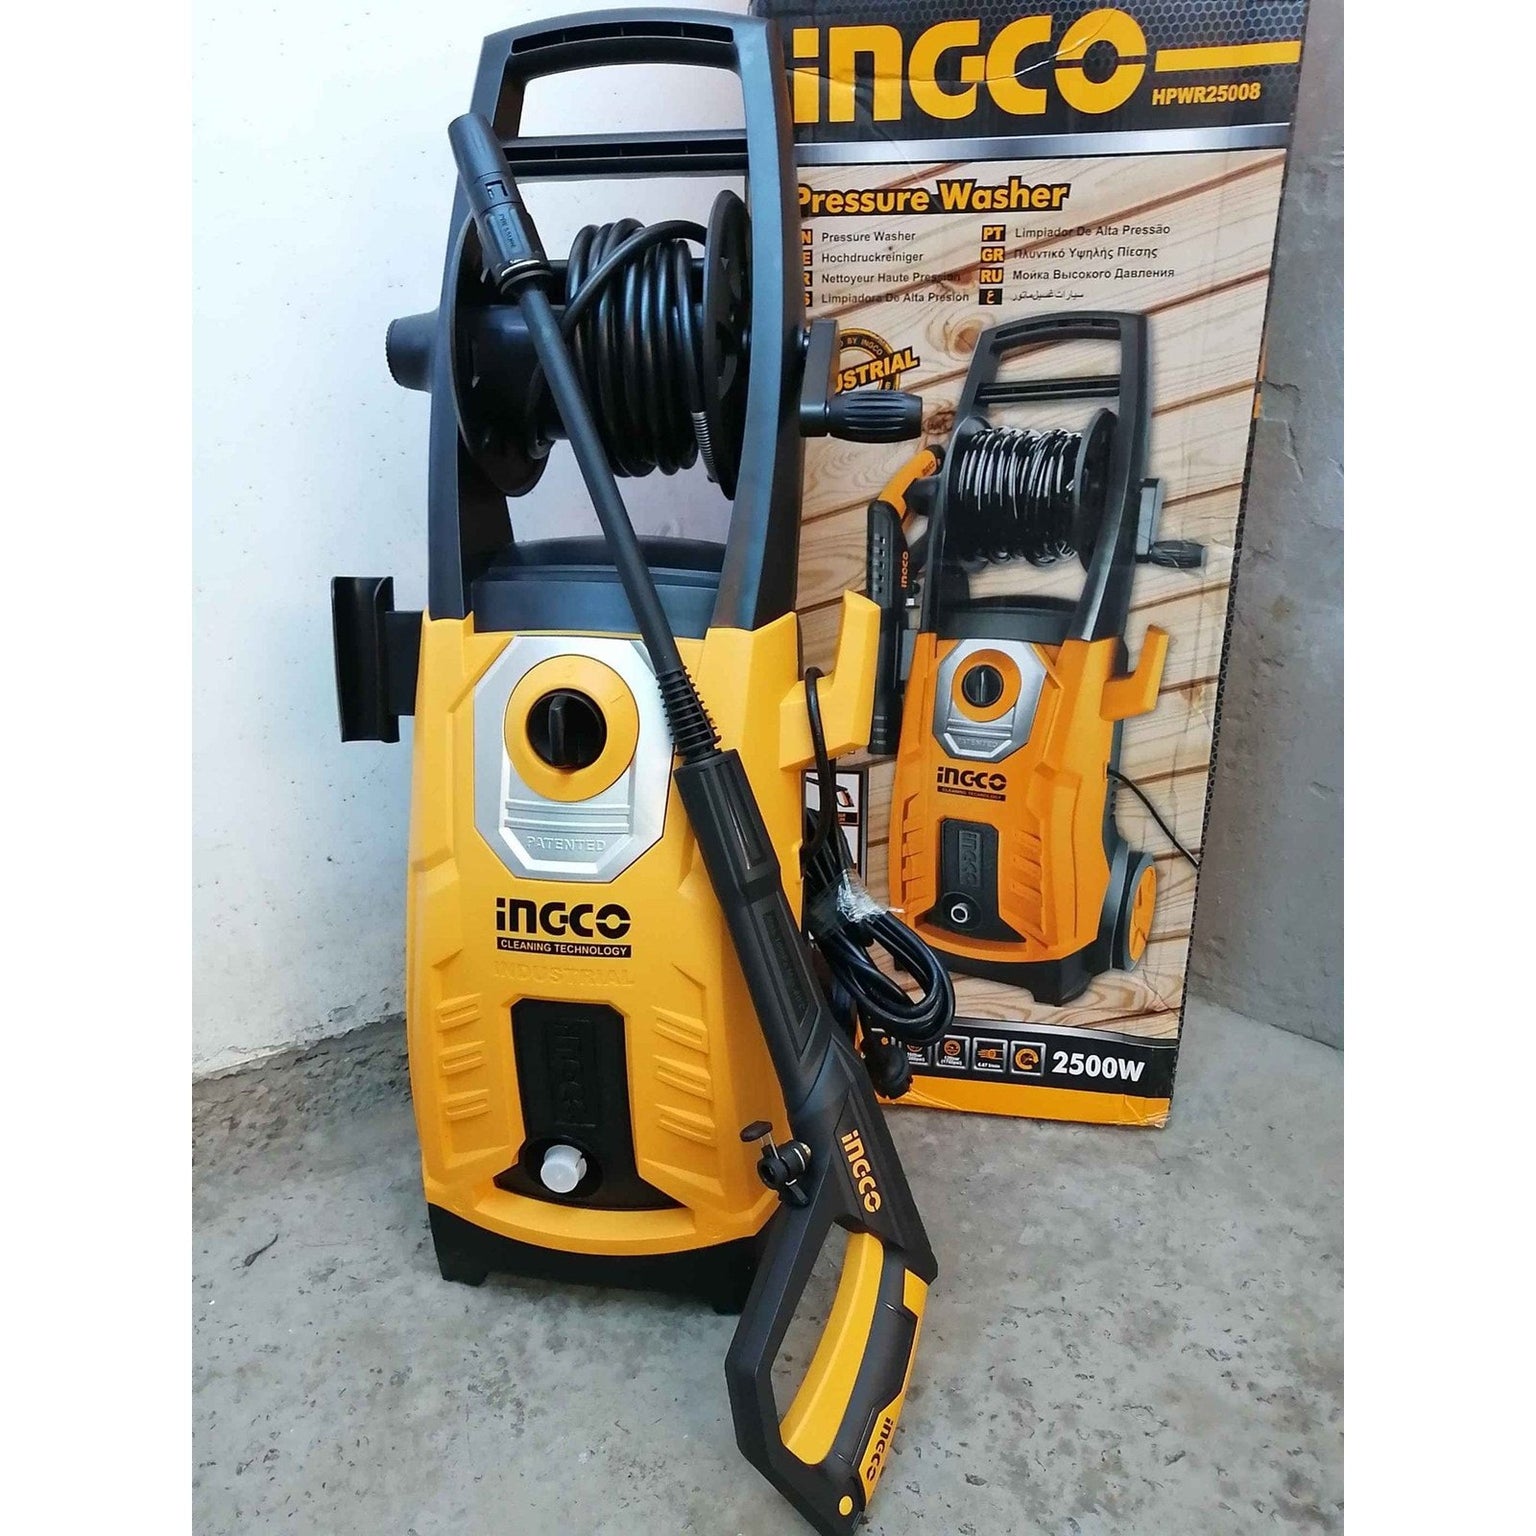 Ingco High Pressure Washer 2500W 160Bar - HPWR25008 | Supply Master | Accra, Ghana Pressure Washer Buy Tools hardware Building materials